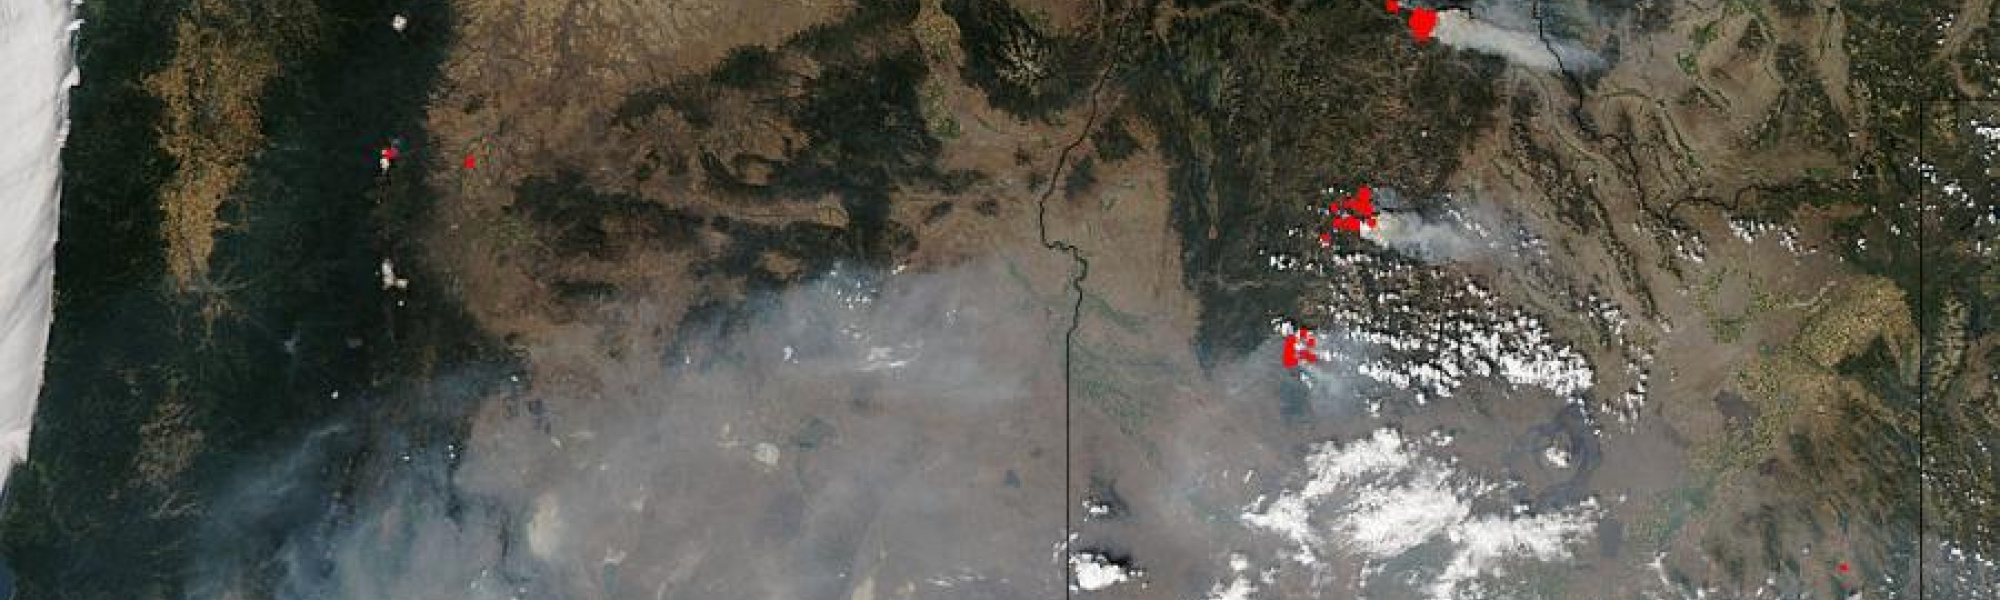 Fires and smoke in western United States